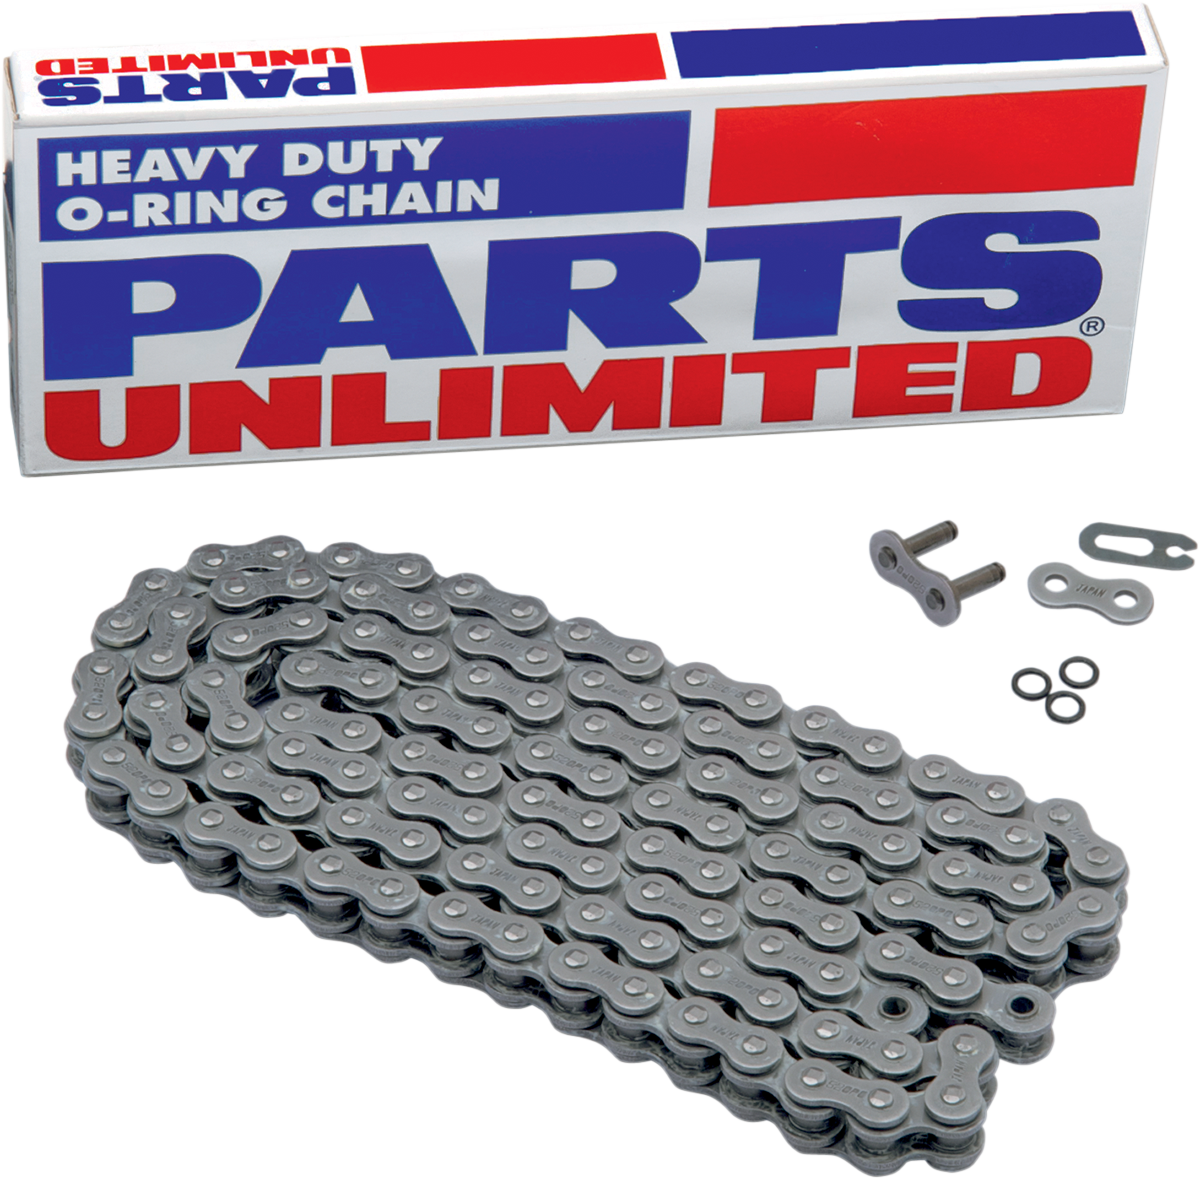 PARTS UNLIMITED-CHAIN MOTORCYCLE CHAIN CHAIN PU 530 O-RNG X 120L